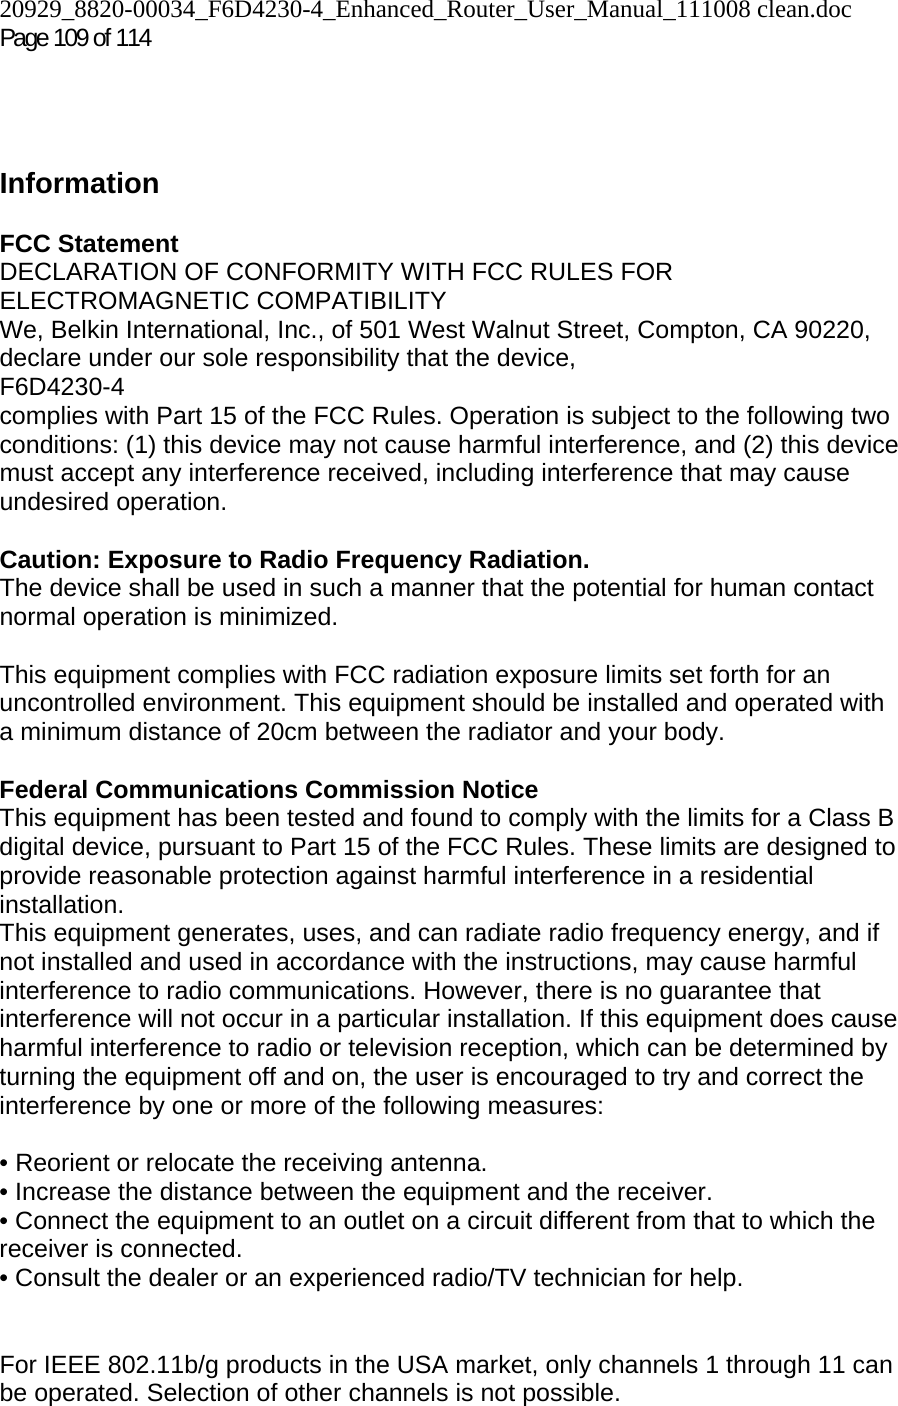 20929_8820-00034_F6D4230-4_Enhanced_Router_User_Manual_111008 clean.doc Page 109 of 114      Information  FCC Statement DECLARATION OF CONFORMITY WITH FCC RULES FOR ELECTROMAGNETIC COMPATIBILITY We, Belkin International, Inc., of 501 West Walnut Street, Compton, CA 90220, declare under our sole responsibility that the device, F6D4230-4  complies with Part 15 of the FCC Rules. Operation is subject to the following two conditions: (1) this device may not cause harmful interference, and (2) this device must accept any interference received, including interference that may cause undesired operation.  Caution: Exposure to Radio Frequency Radiation.  The device shall be used in such a manner that the potential for human contact normal operation is minimized.  This equipment complies with FCC radiation exposure limits set forth for an uncontrolled environment. This equipment should be installed and operated with a minimum distance of 20cm between the radiator and your body.  Federal Communications Commission Notice  This equipment has been tested and found to comply with the limits for a Class B digital device, pursuant to Part 15 of the FCC Rules. These limits are designed to provide reasonable protection against harmful interference in a residential installation. This equipment generates, uses, and can radiate radio frequency energy, and if not installed and used in accordance with the instructions, may cause harmful interference to radio communications. However, there is no guarantee that interference will not occur in a particular installation. If this equipment does cause harmful interference to radio or television reception, which can be determined by turning the equipment off and on, the user is encouraged to try and correct the interference by one or more of the following measures:  • Reorient or relocate the receiving antenna.  • Increase the distance between the equipment and the receiver.  • Connect the equipment to an outlet on a circuit different from that to which the receiver is connected.  • Consult the dealer or an experienced radio/TV technician for help.   For IEEE 802.11b/g products in the USA market, only channels 1 through 11 can be operated. Selection of other channels is not possible. 